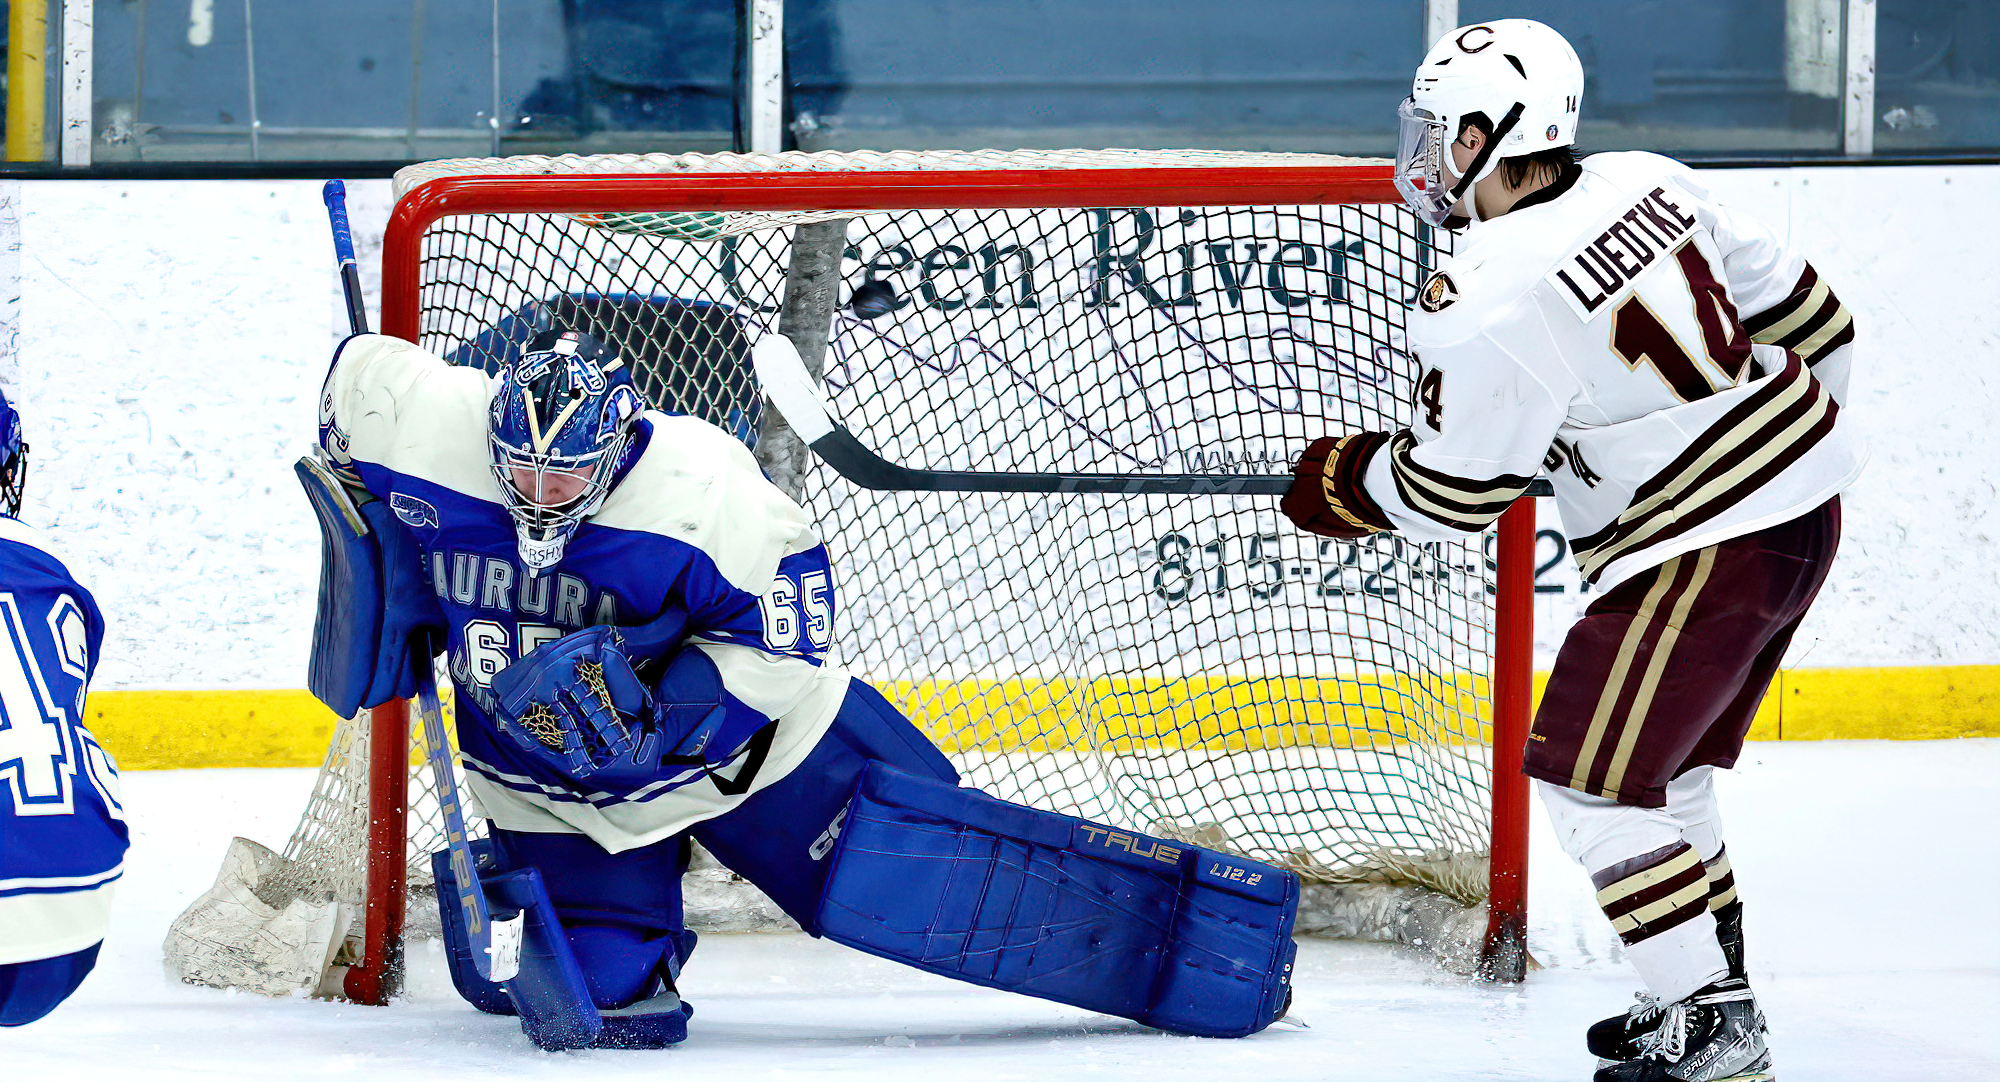 Ben Luedtke puts home the first goal of the game in the Cobbers' 4-1 win at Aurora. (Photo courtesy of Steve Woltmann)